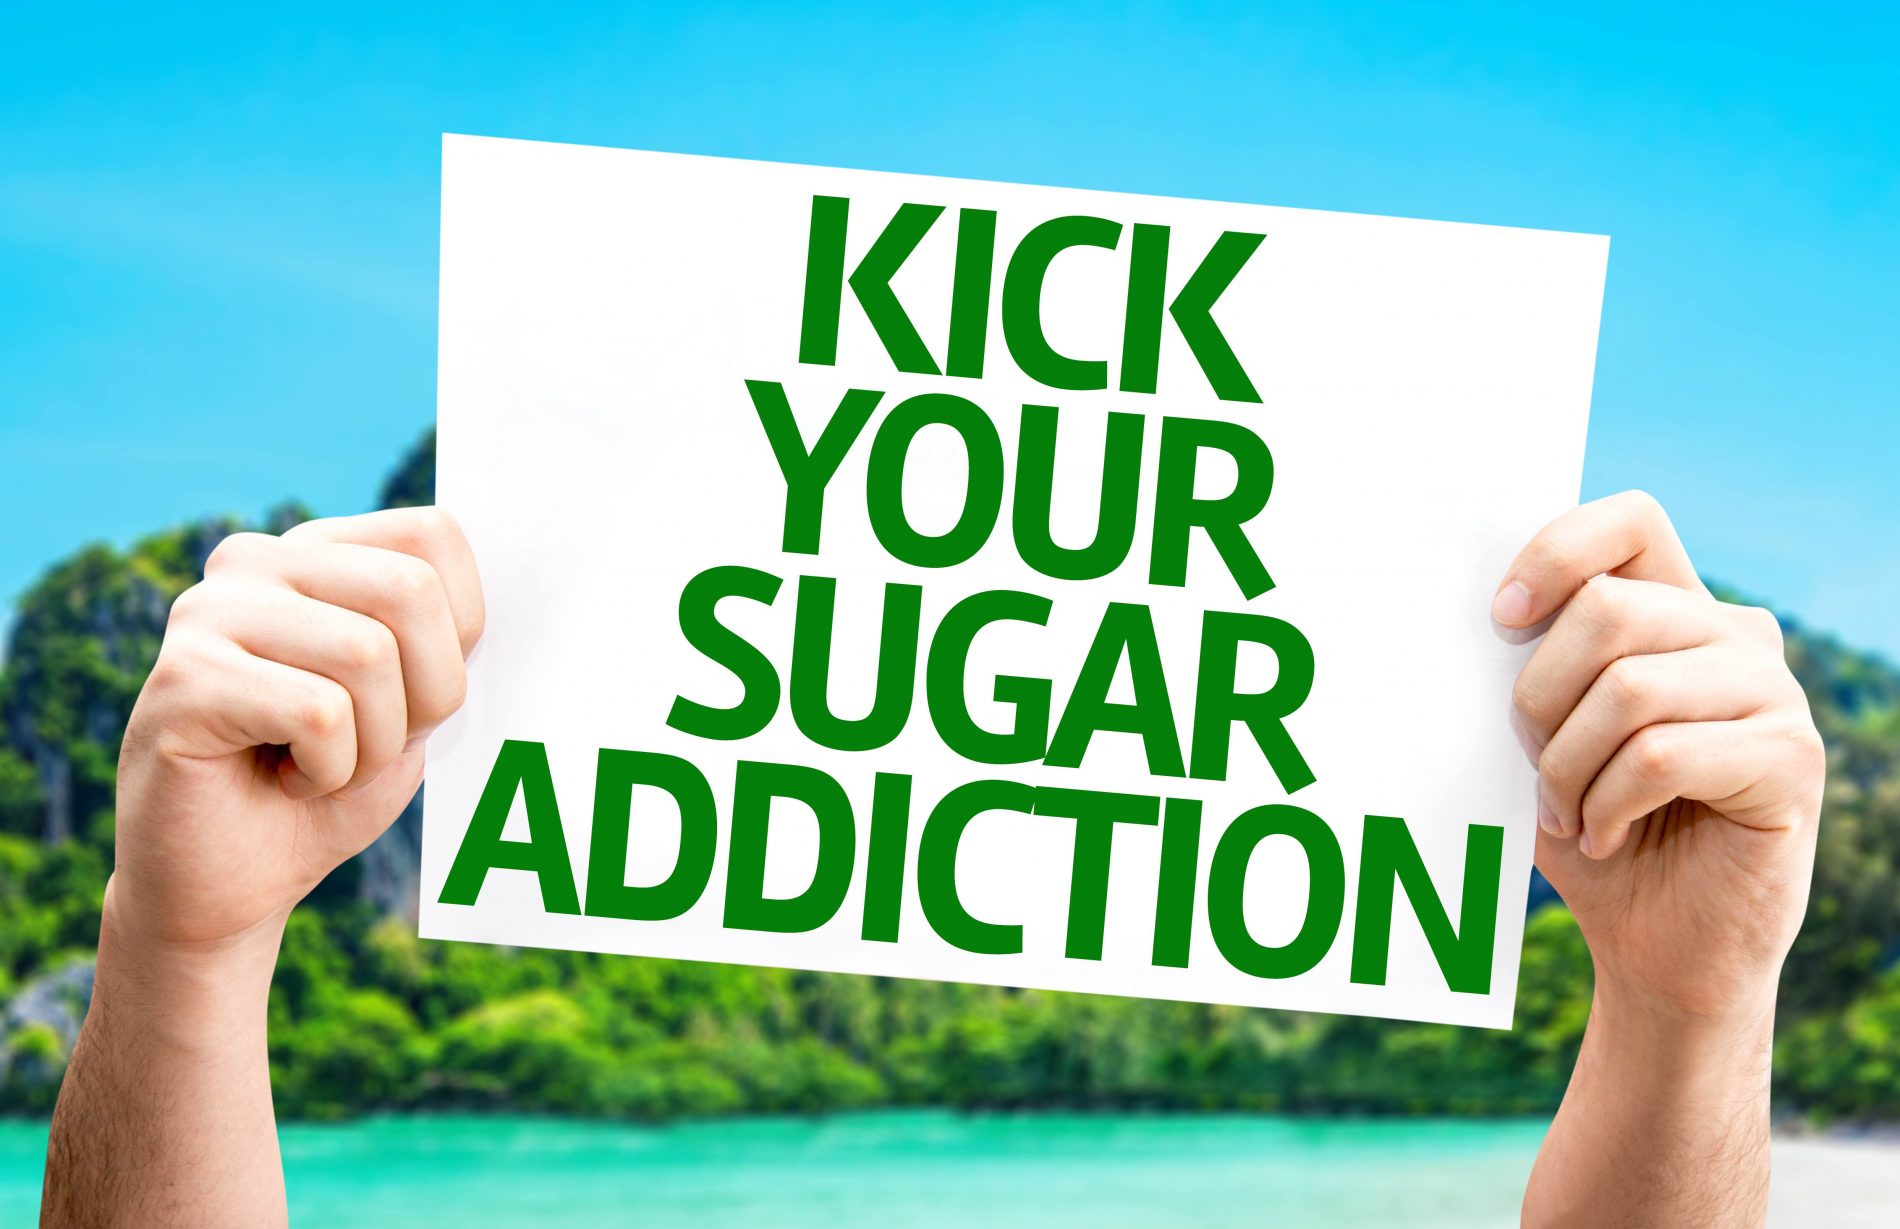 Finally Quit Your Sugar Addiction With These Top Tips